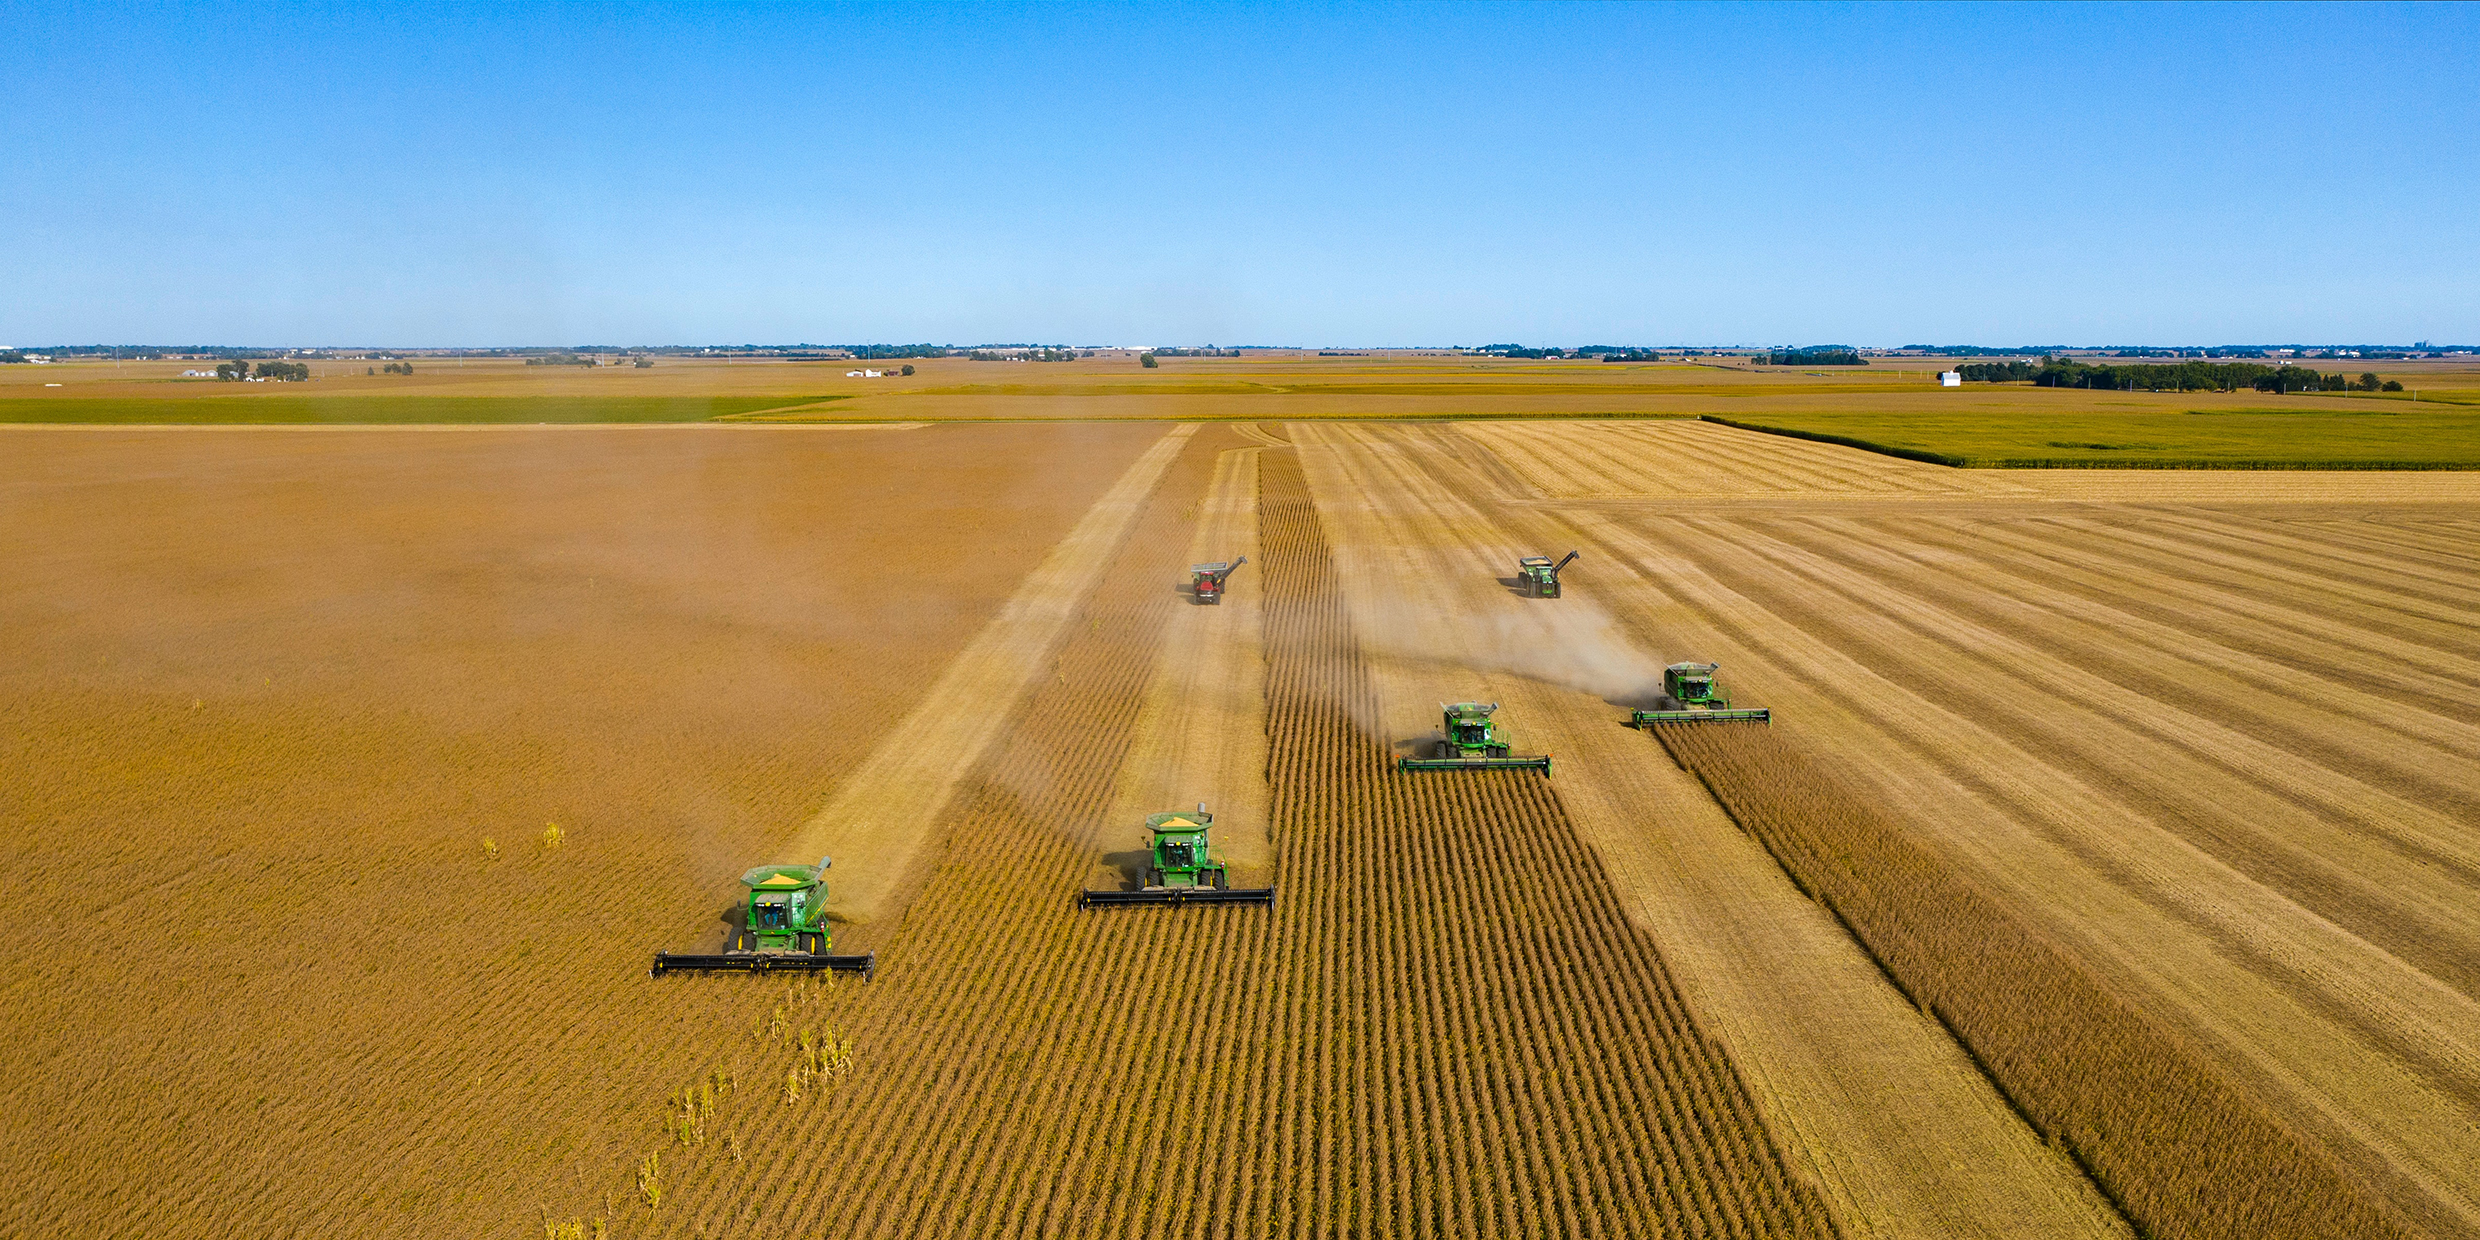 Aerial image of several mechanical harvesters working in a wide expanse of crops